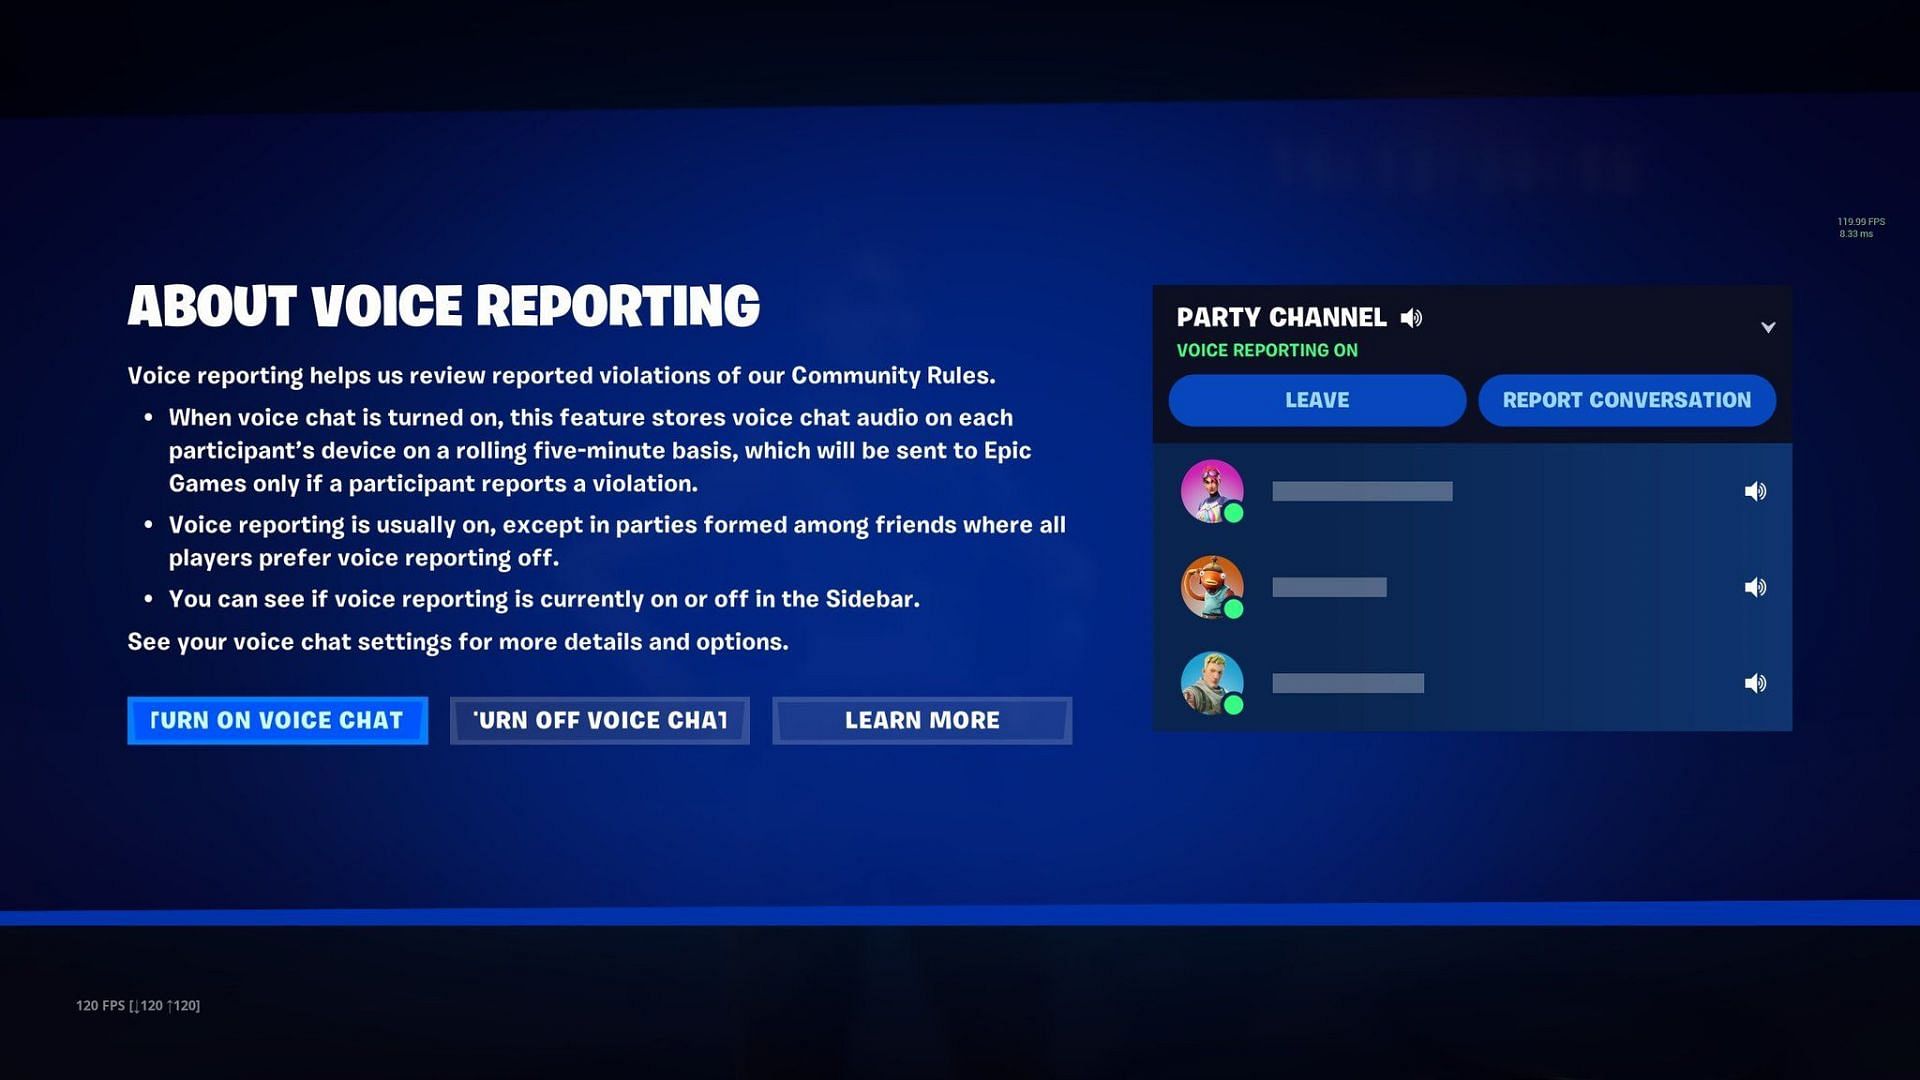 Fortnite Voice Reporting Explained: How it Works & How to Report